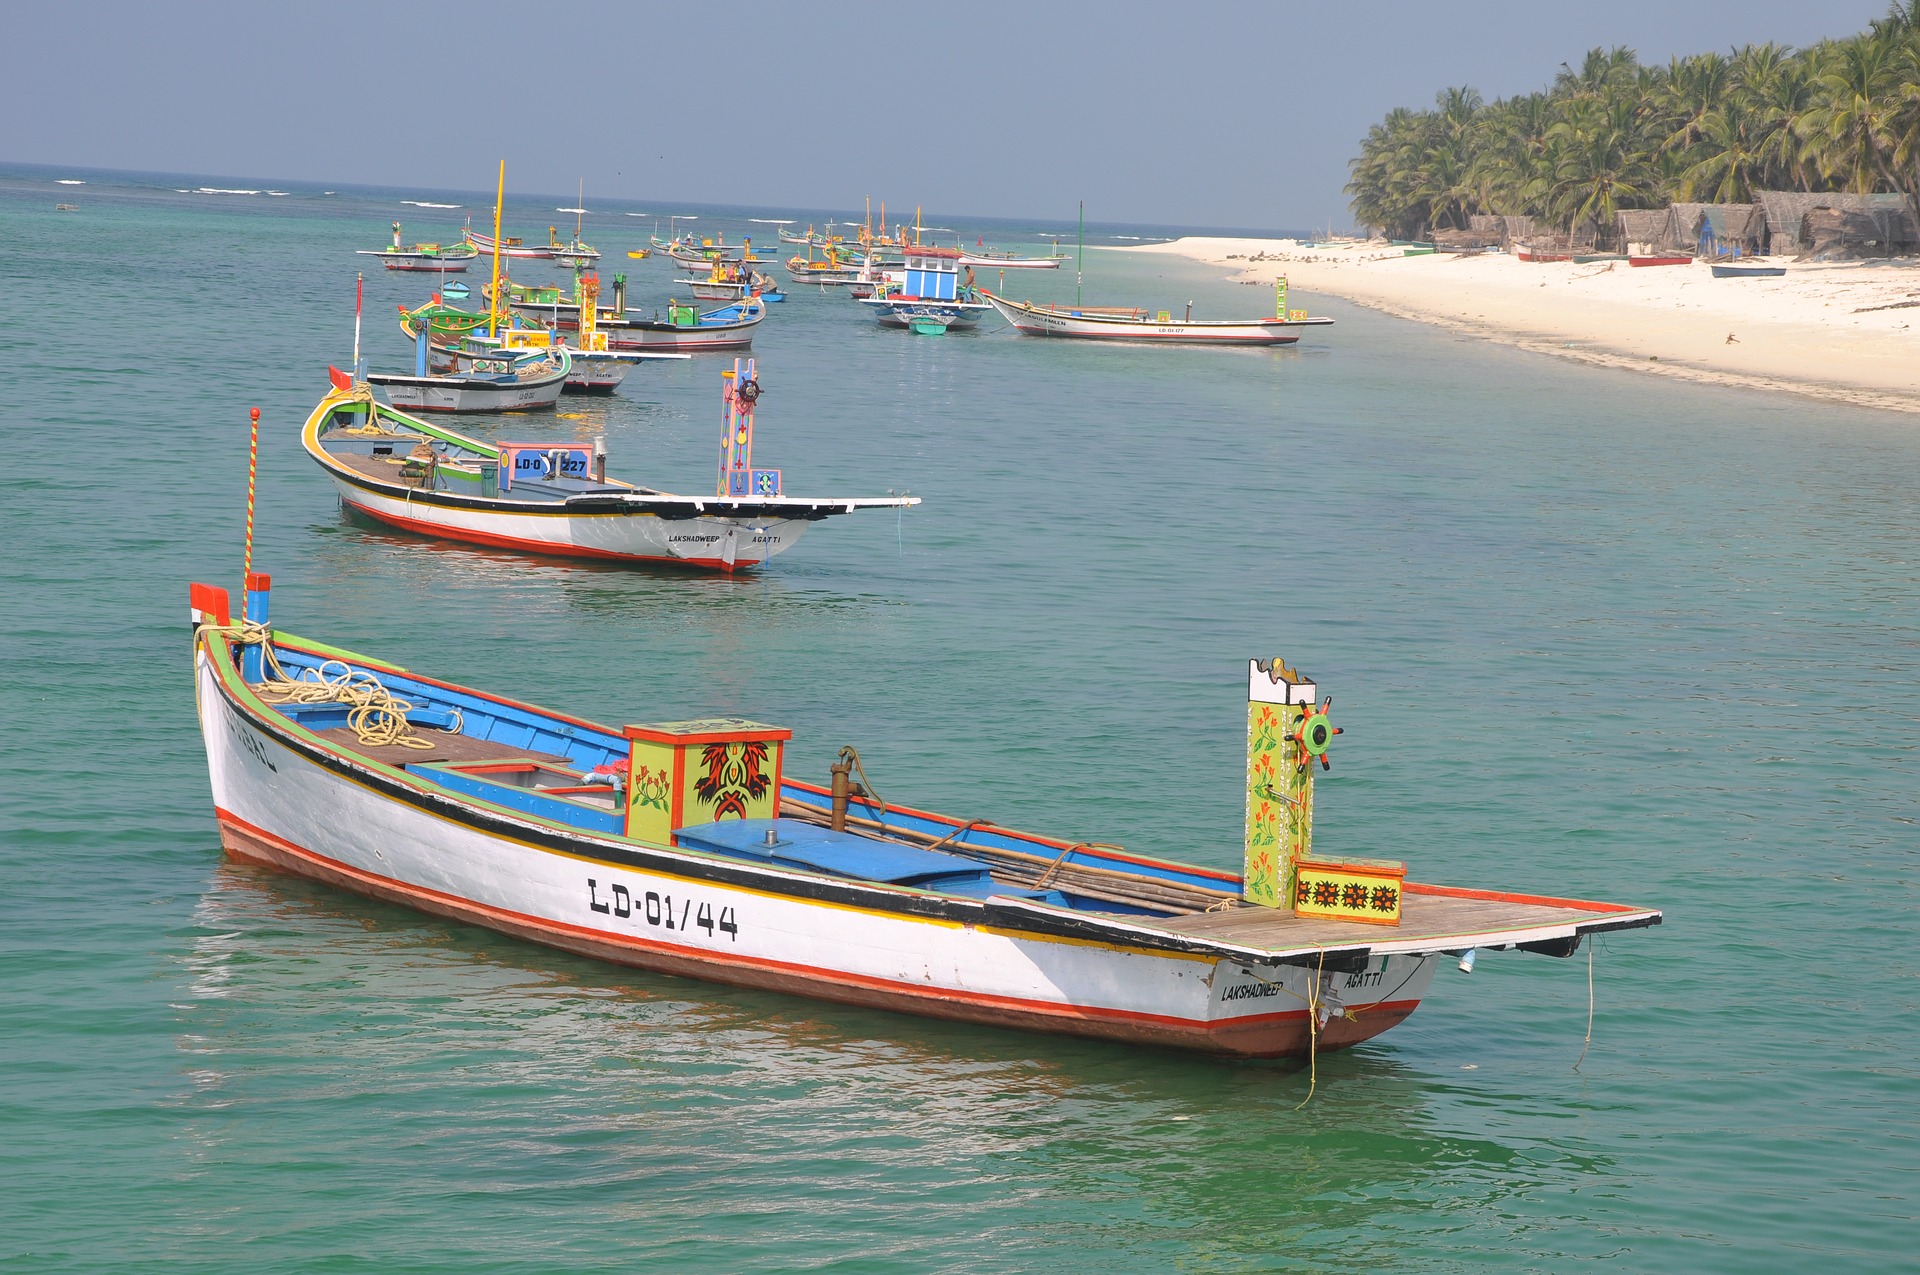 If you want visit any island in March in India, Lakshwadeep is a good option to visit. Here is a beach in Lakshwadeep with boats. Clear water and sand.